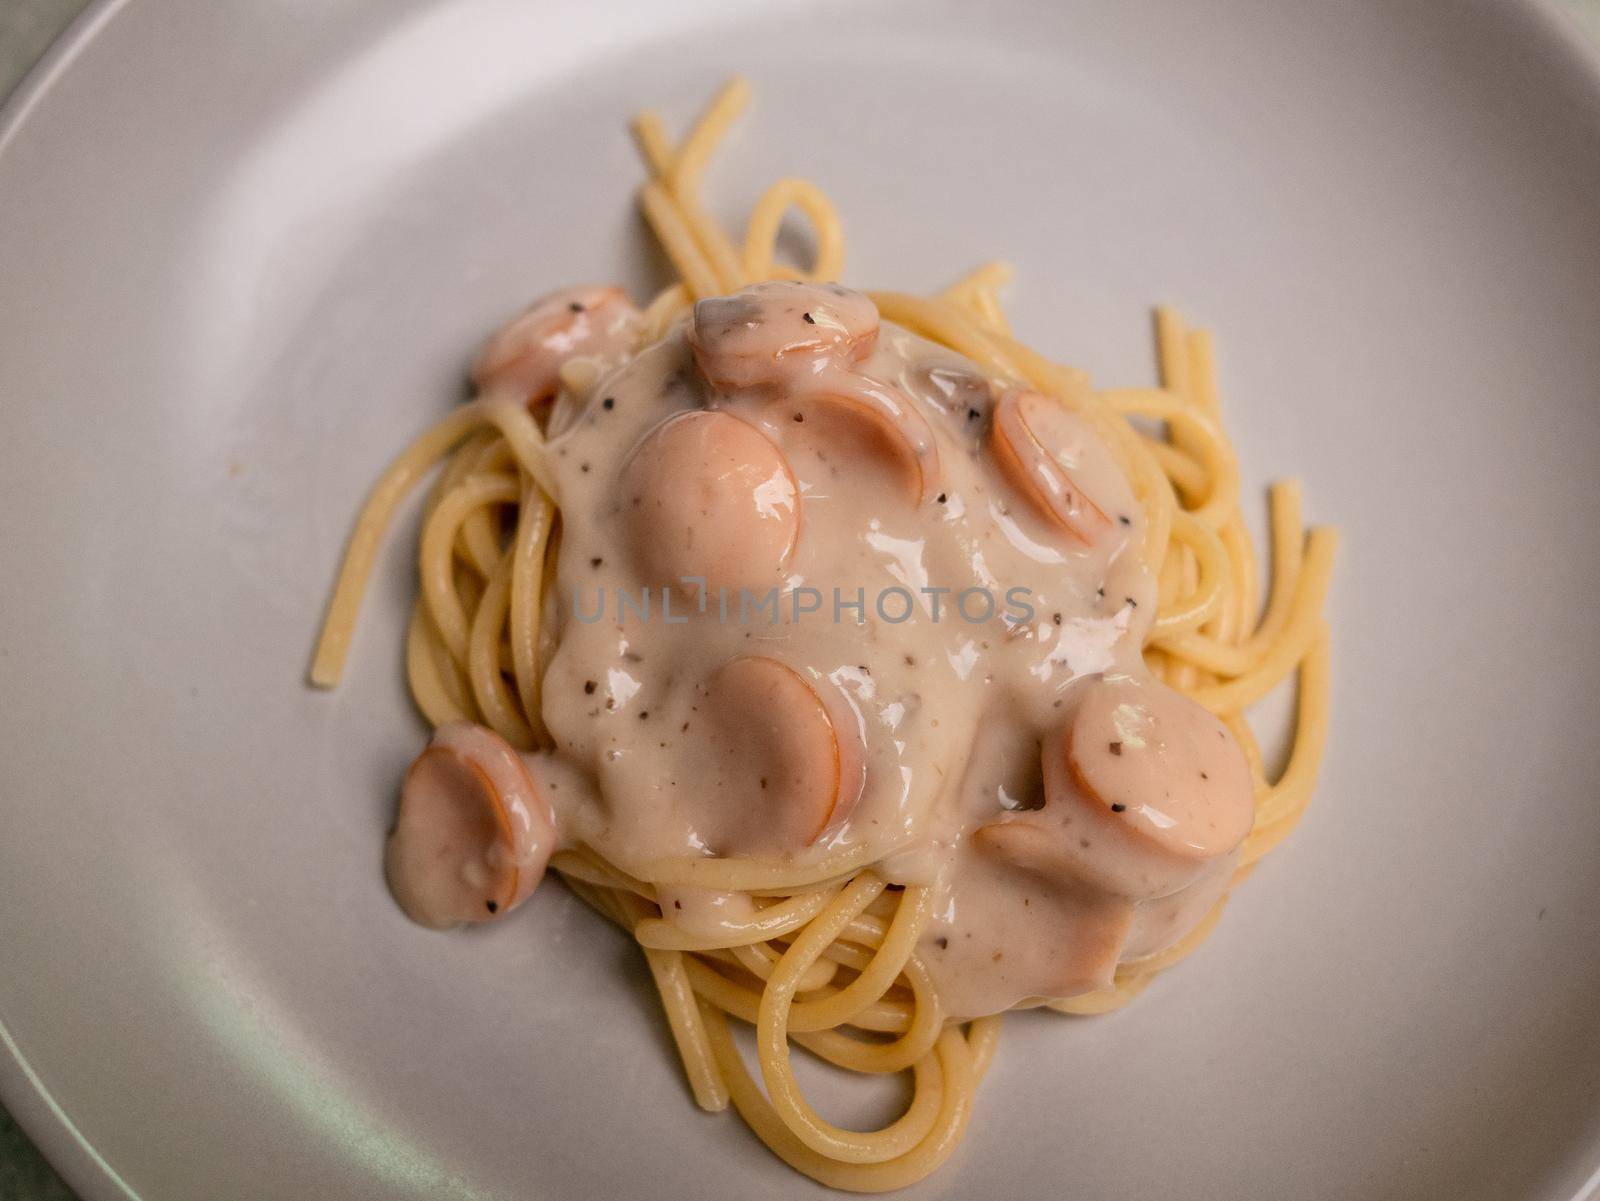 Spaghetti carbonara mushroom sauces with sausages in a plate. Healthy Italian Food and Cooking concepts. by TEERASAK